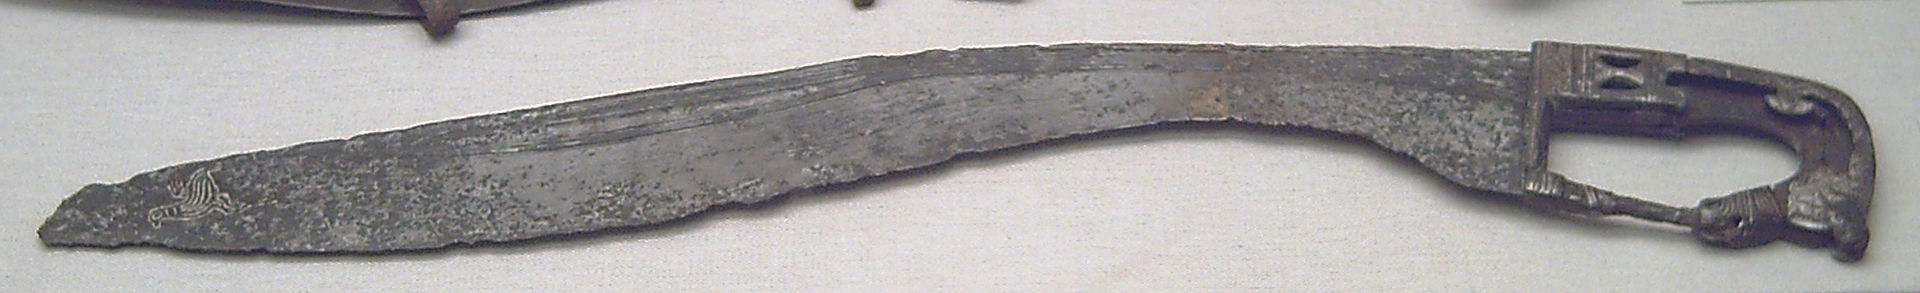 Iberian falcata, 4th/3rd century BC. This weapon, a scythe-shaped sword, was unique to Iberia. By its inherent weight distribution, it could deliver blows as powerful as an axe. National Archaeological Museum of Spain, Madrid